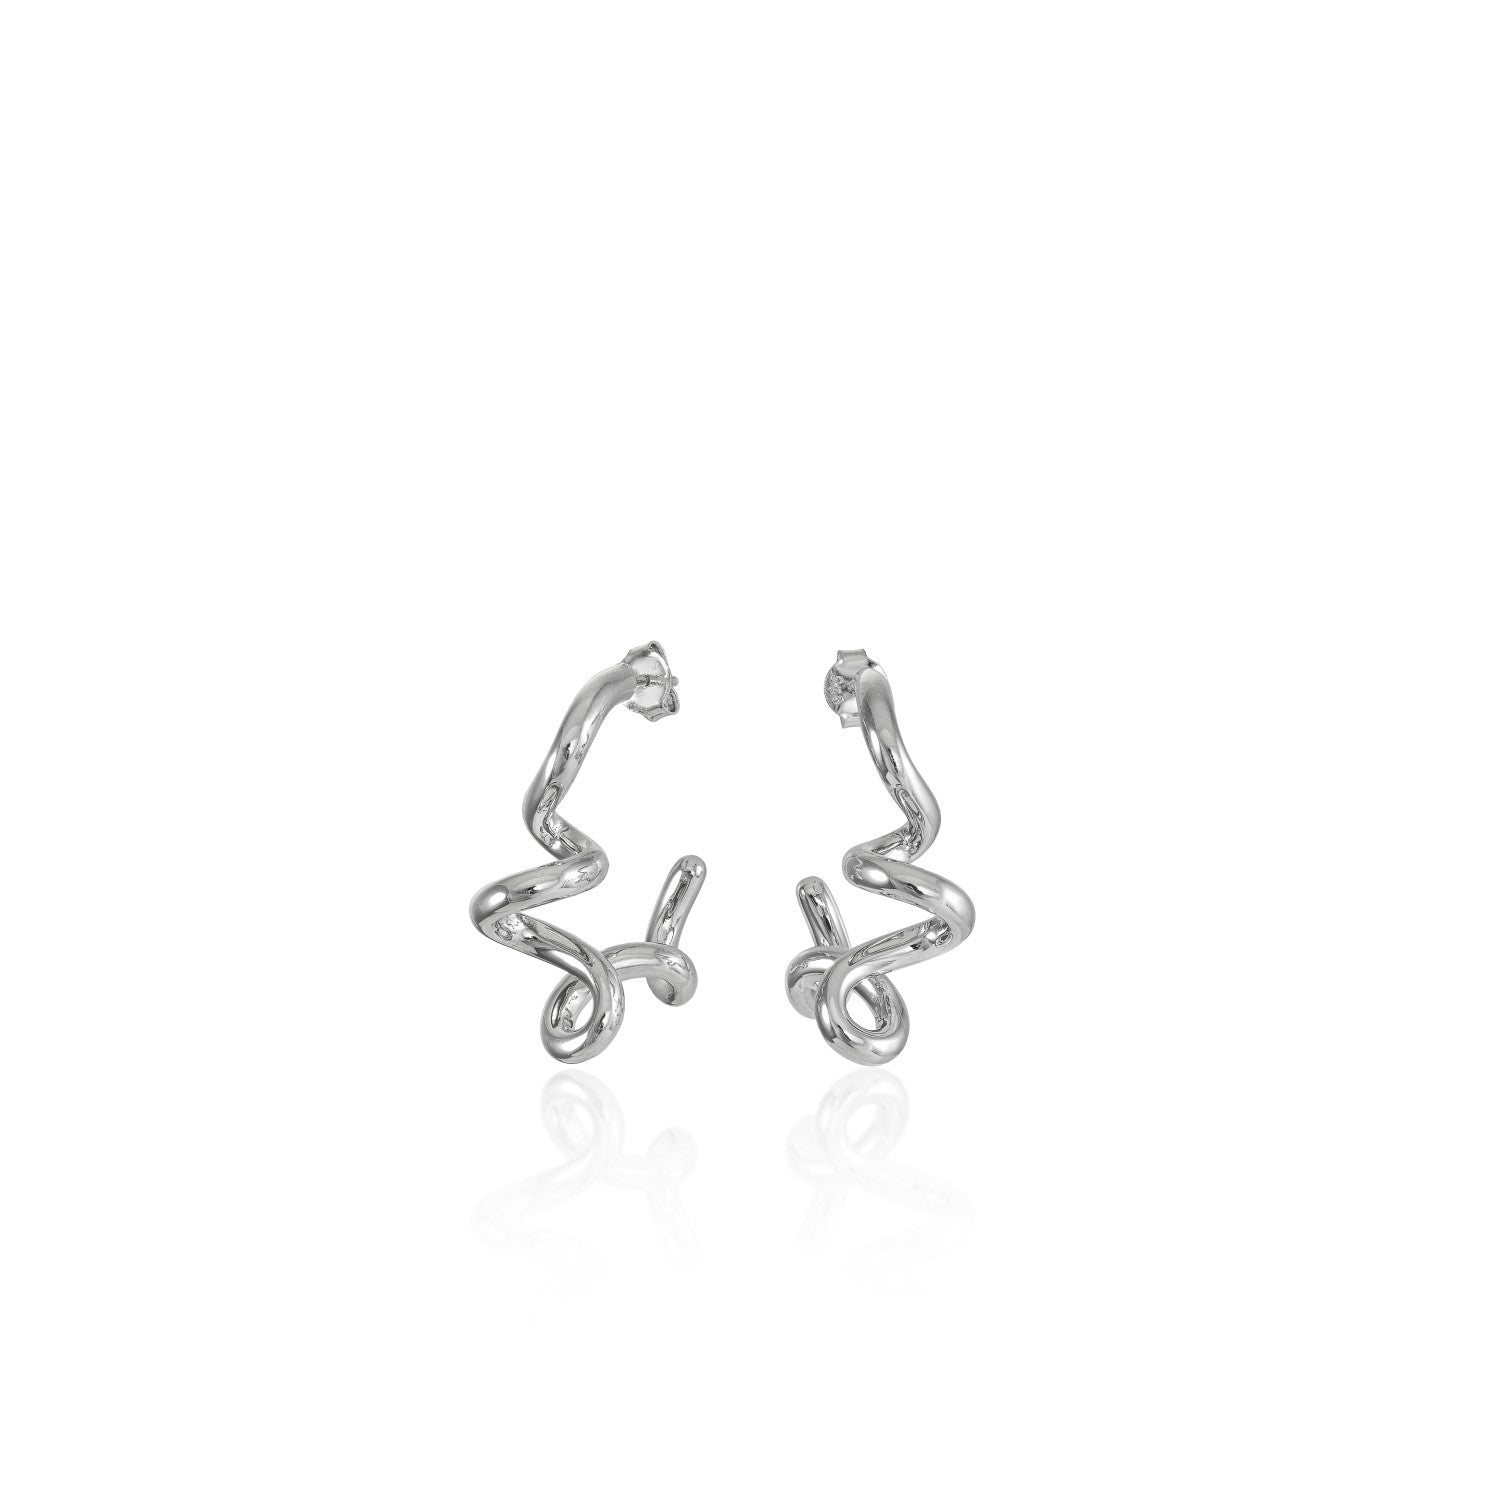 Original silver earrings with a ring design